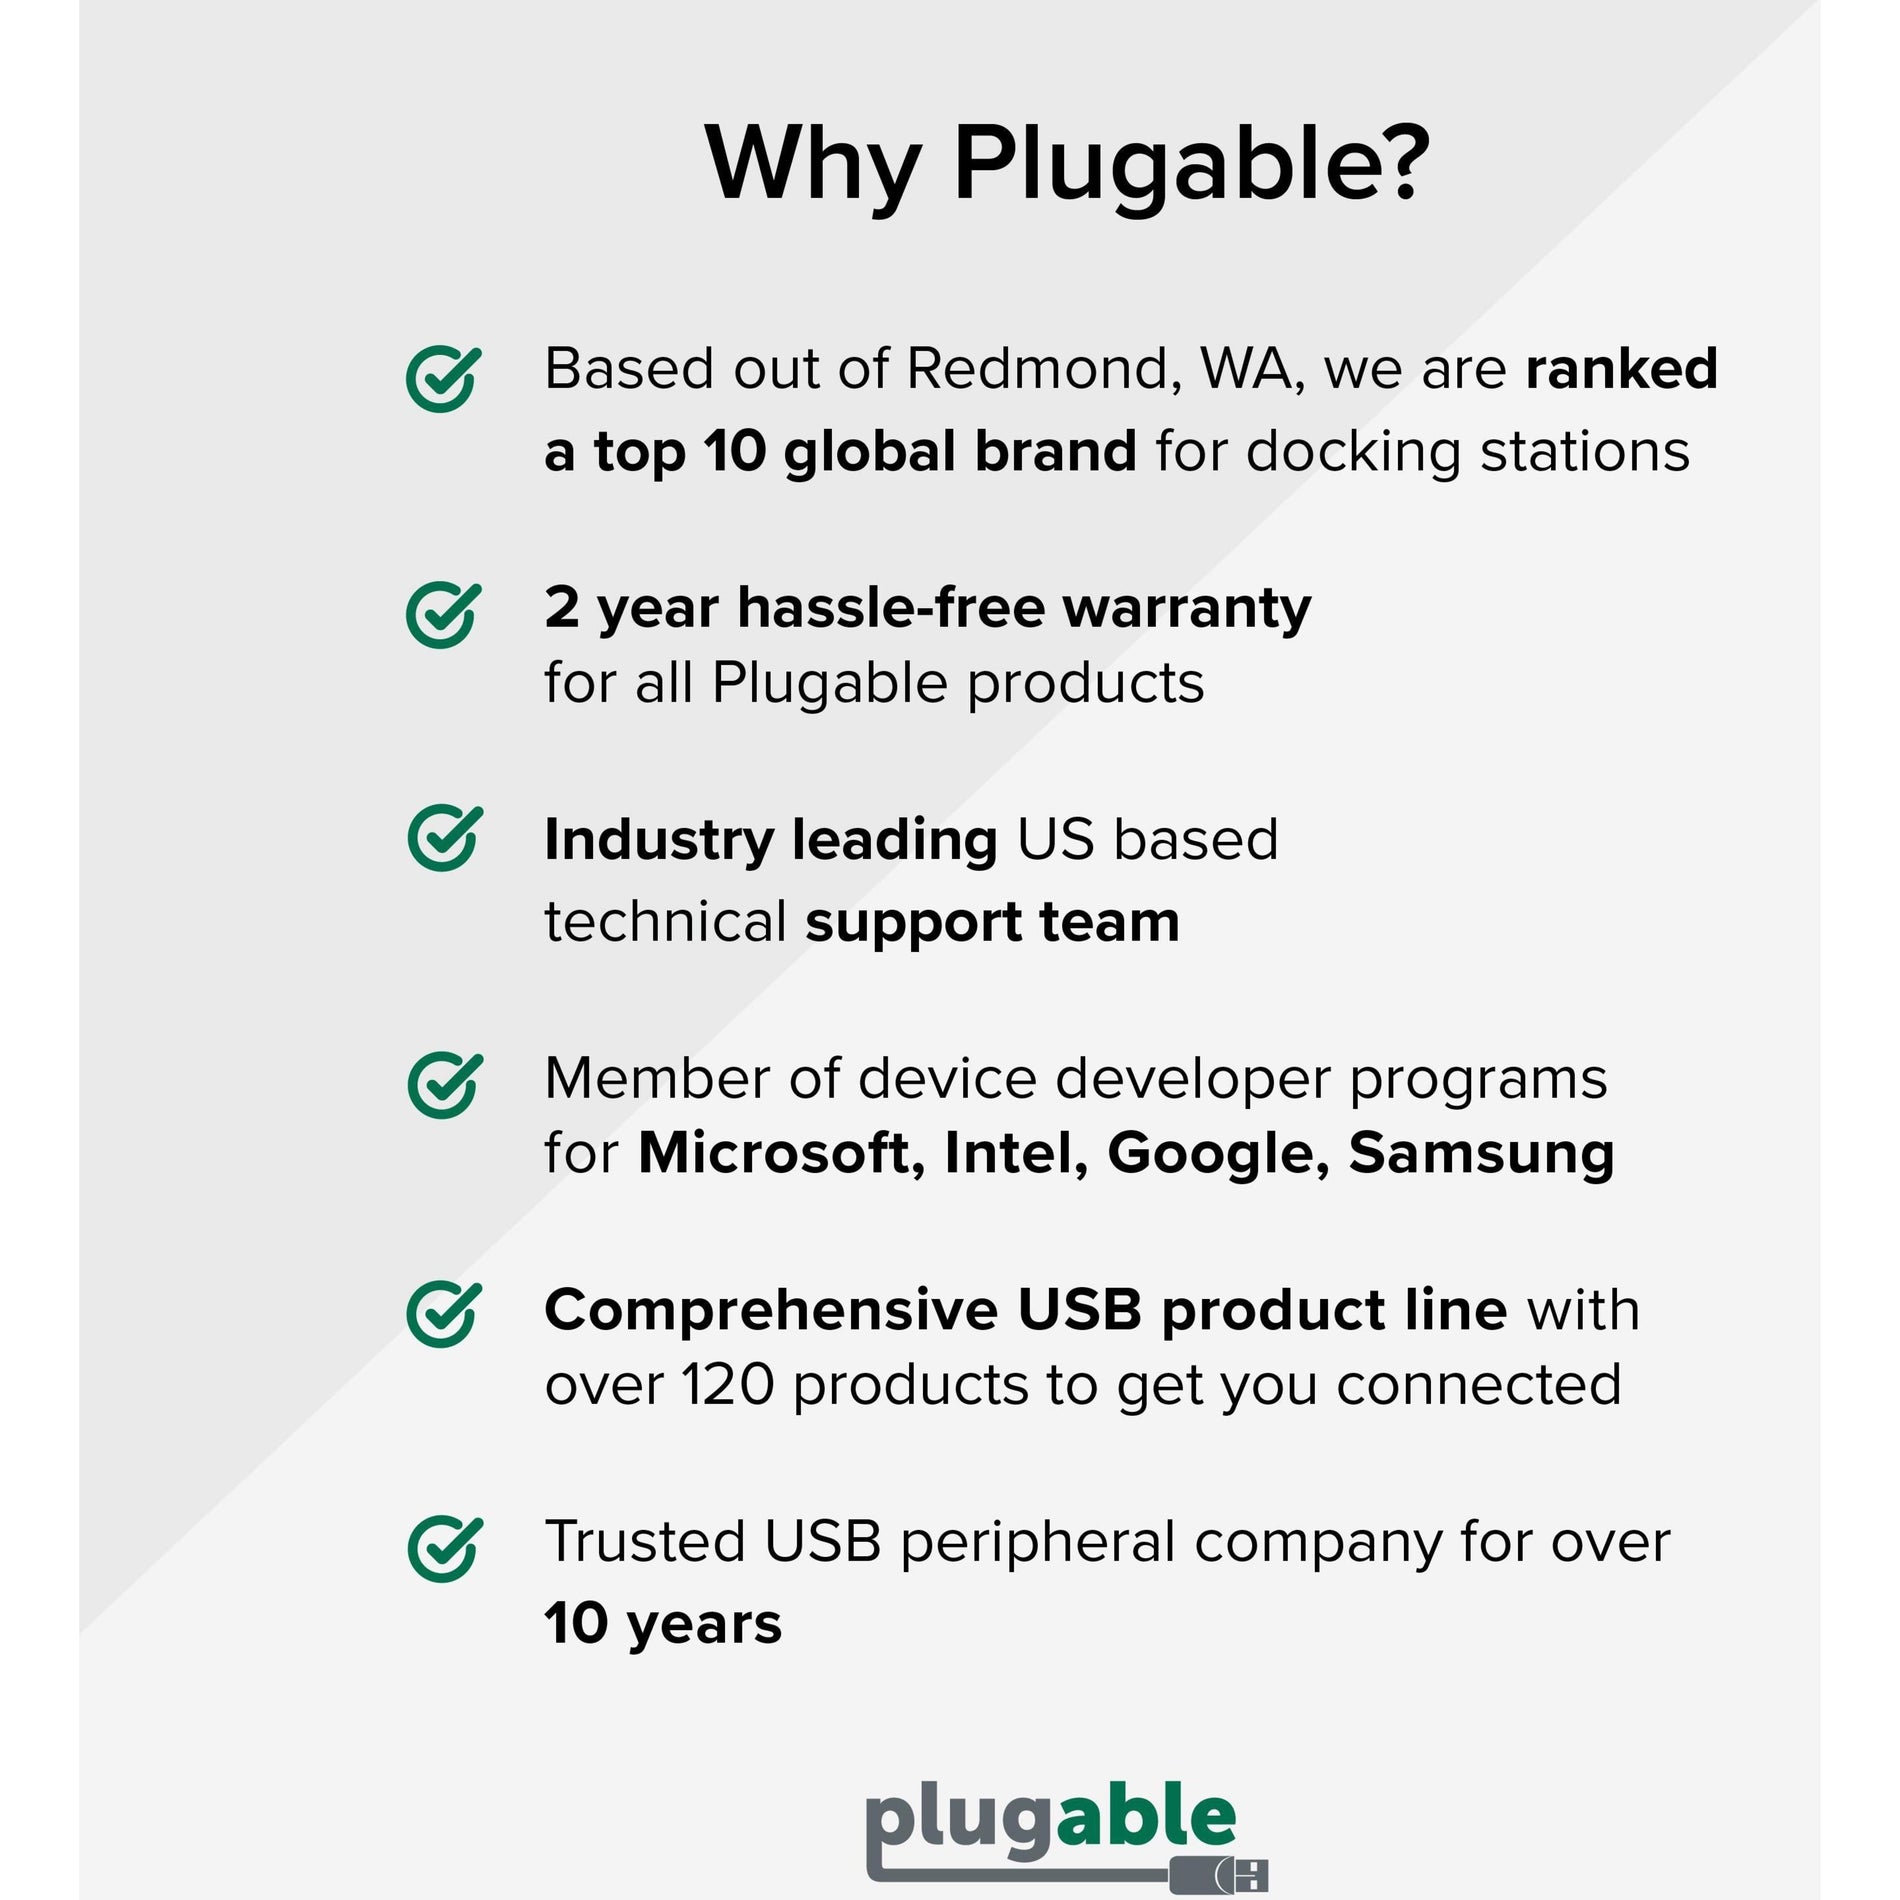 Plugable USB-BT5 Bluetooth Adapter for PC, Bluetooth 5.0 Dongle, Compatible with Windows